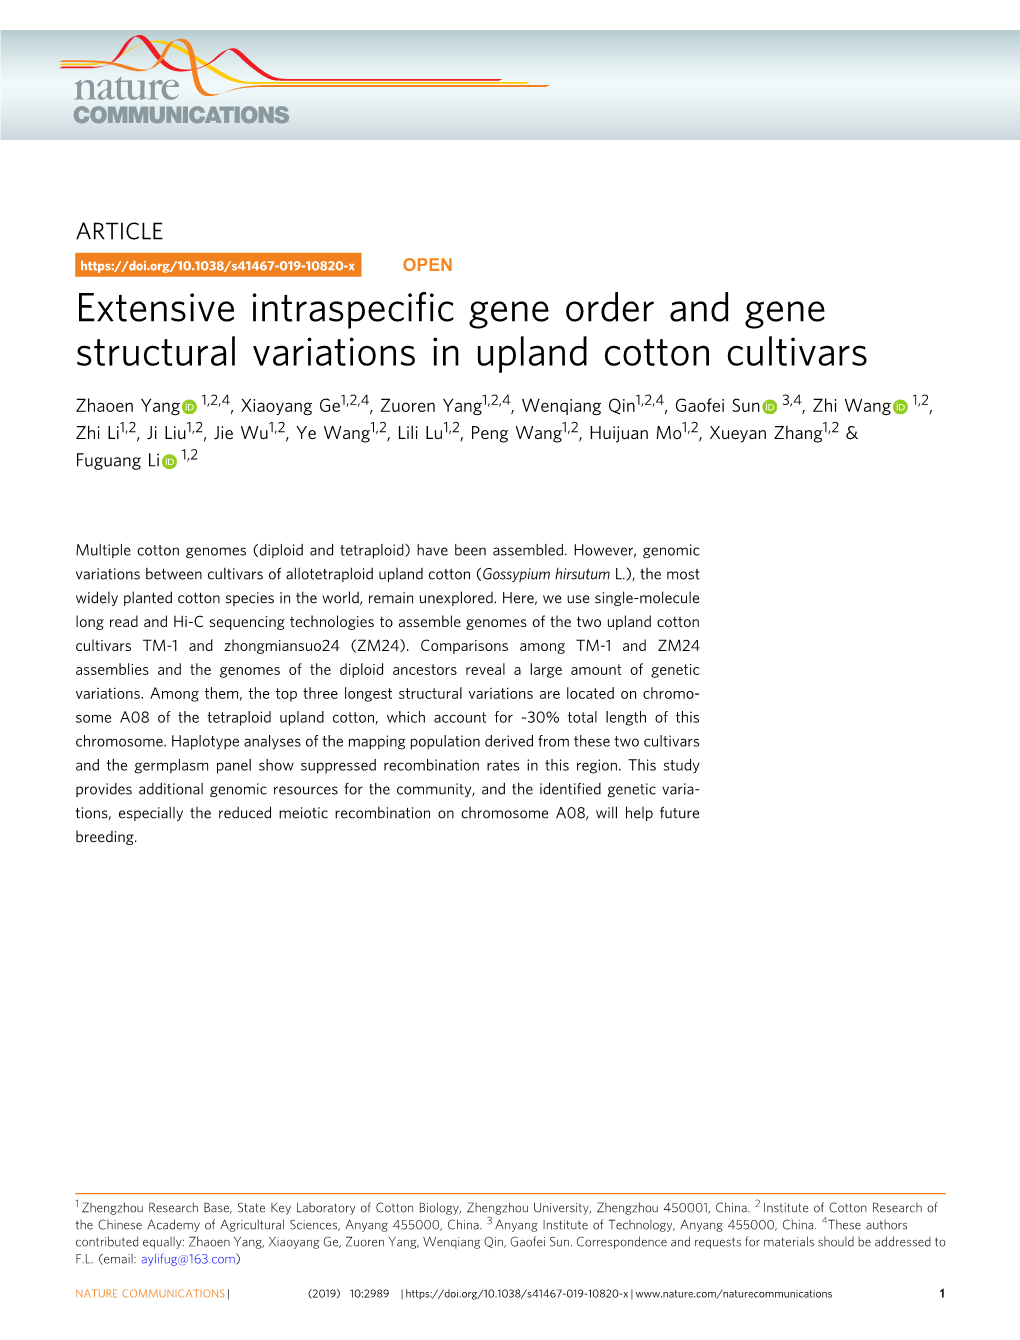 Extensive Intraspecific Gene Order and Gene Structural Variations in Upland Cotton Cultivars